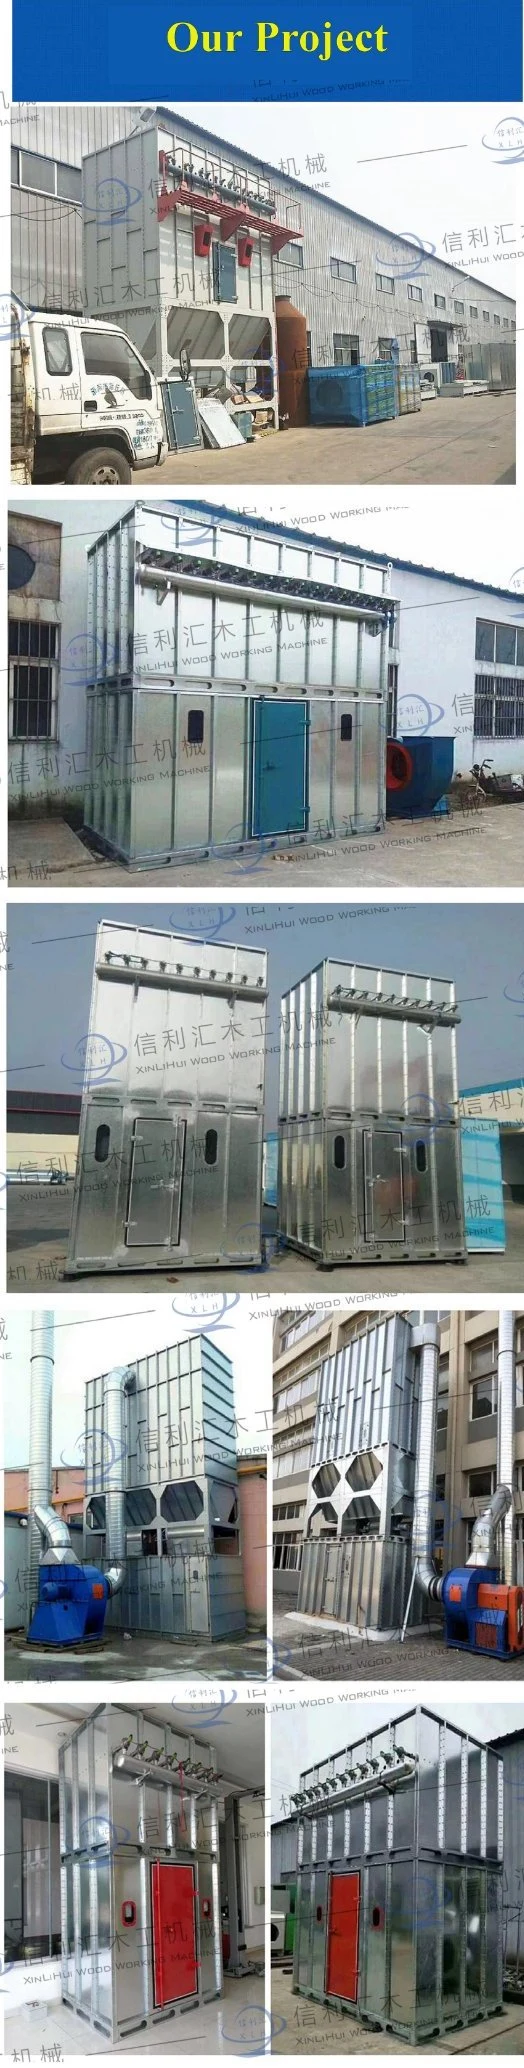 Wood Industrial Baghouse Filter Central Dust Collector for Power or Cement Plant Industrial Cyclone Separator Dust Collector for Woodworking Machine